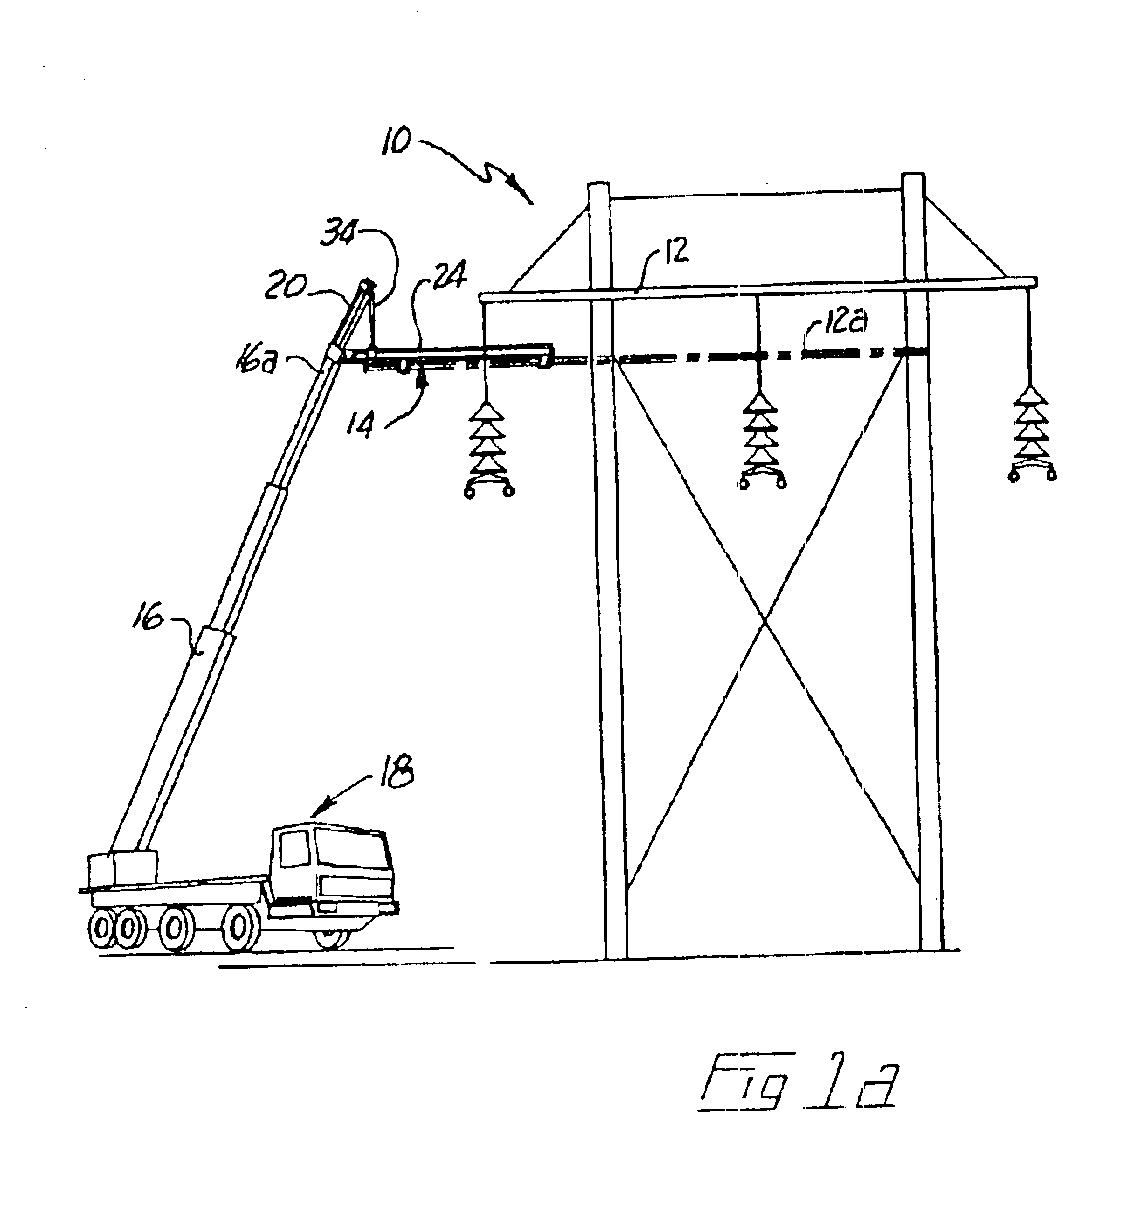 Apparatus for precisely manipulating elongate objects adjacent to and such as energized overhead high voltage transmission lines